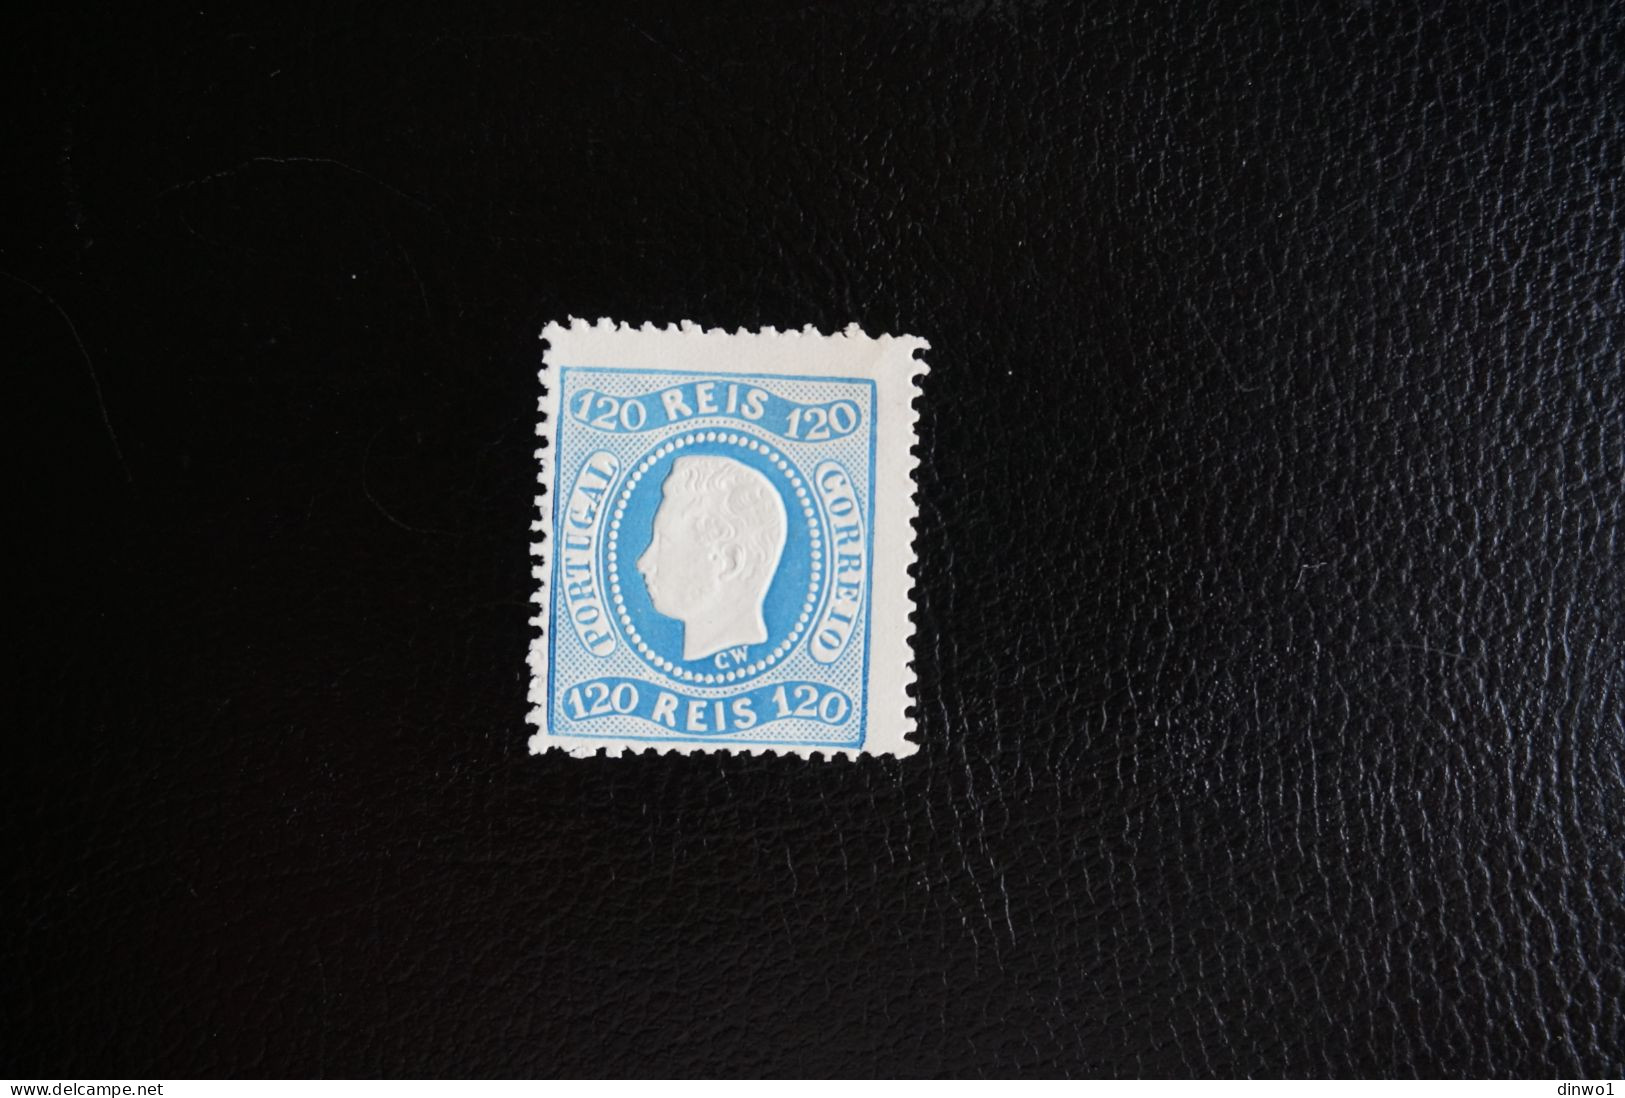 (T6) Portugal - D. Luis I -1905 Reprint 120 R, Perf. 13½ (MNG) - Nuovi